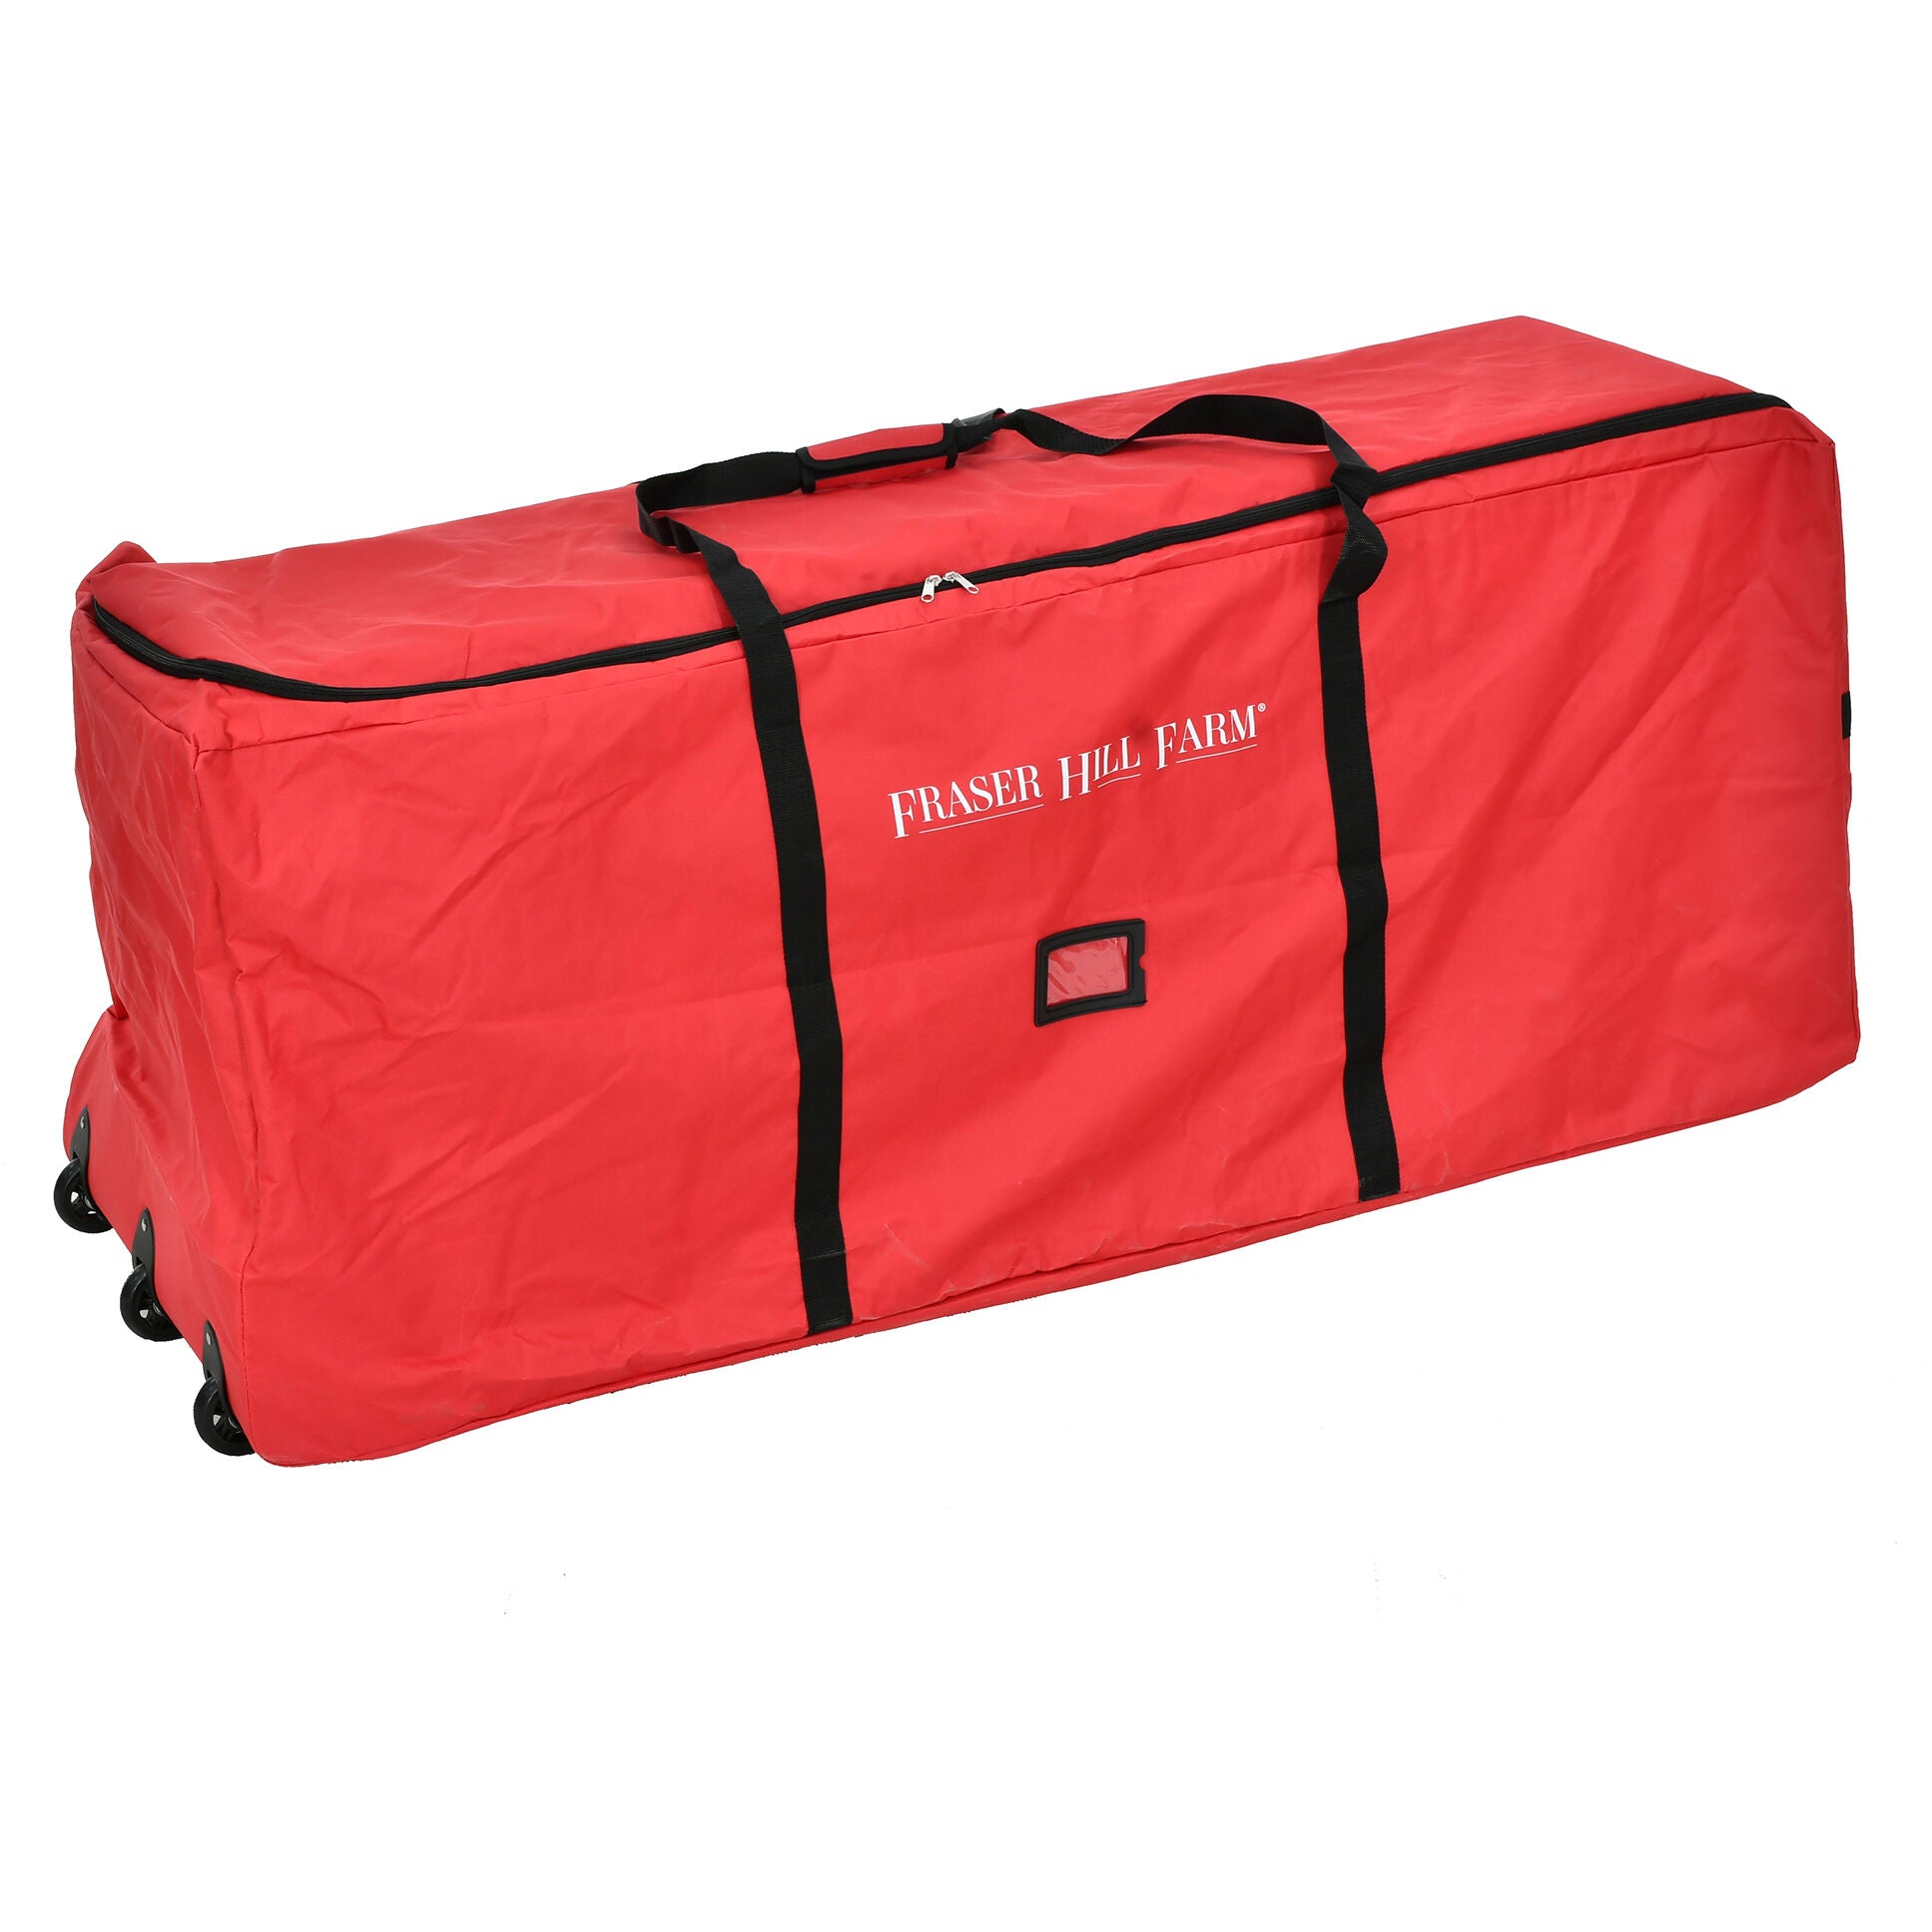 Fraser Hill Farm -  3-Wheel Rolling Storage Bag for Christmas Trees Up To 7.5 Feet, Red